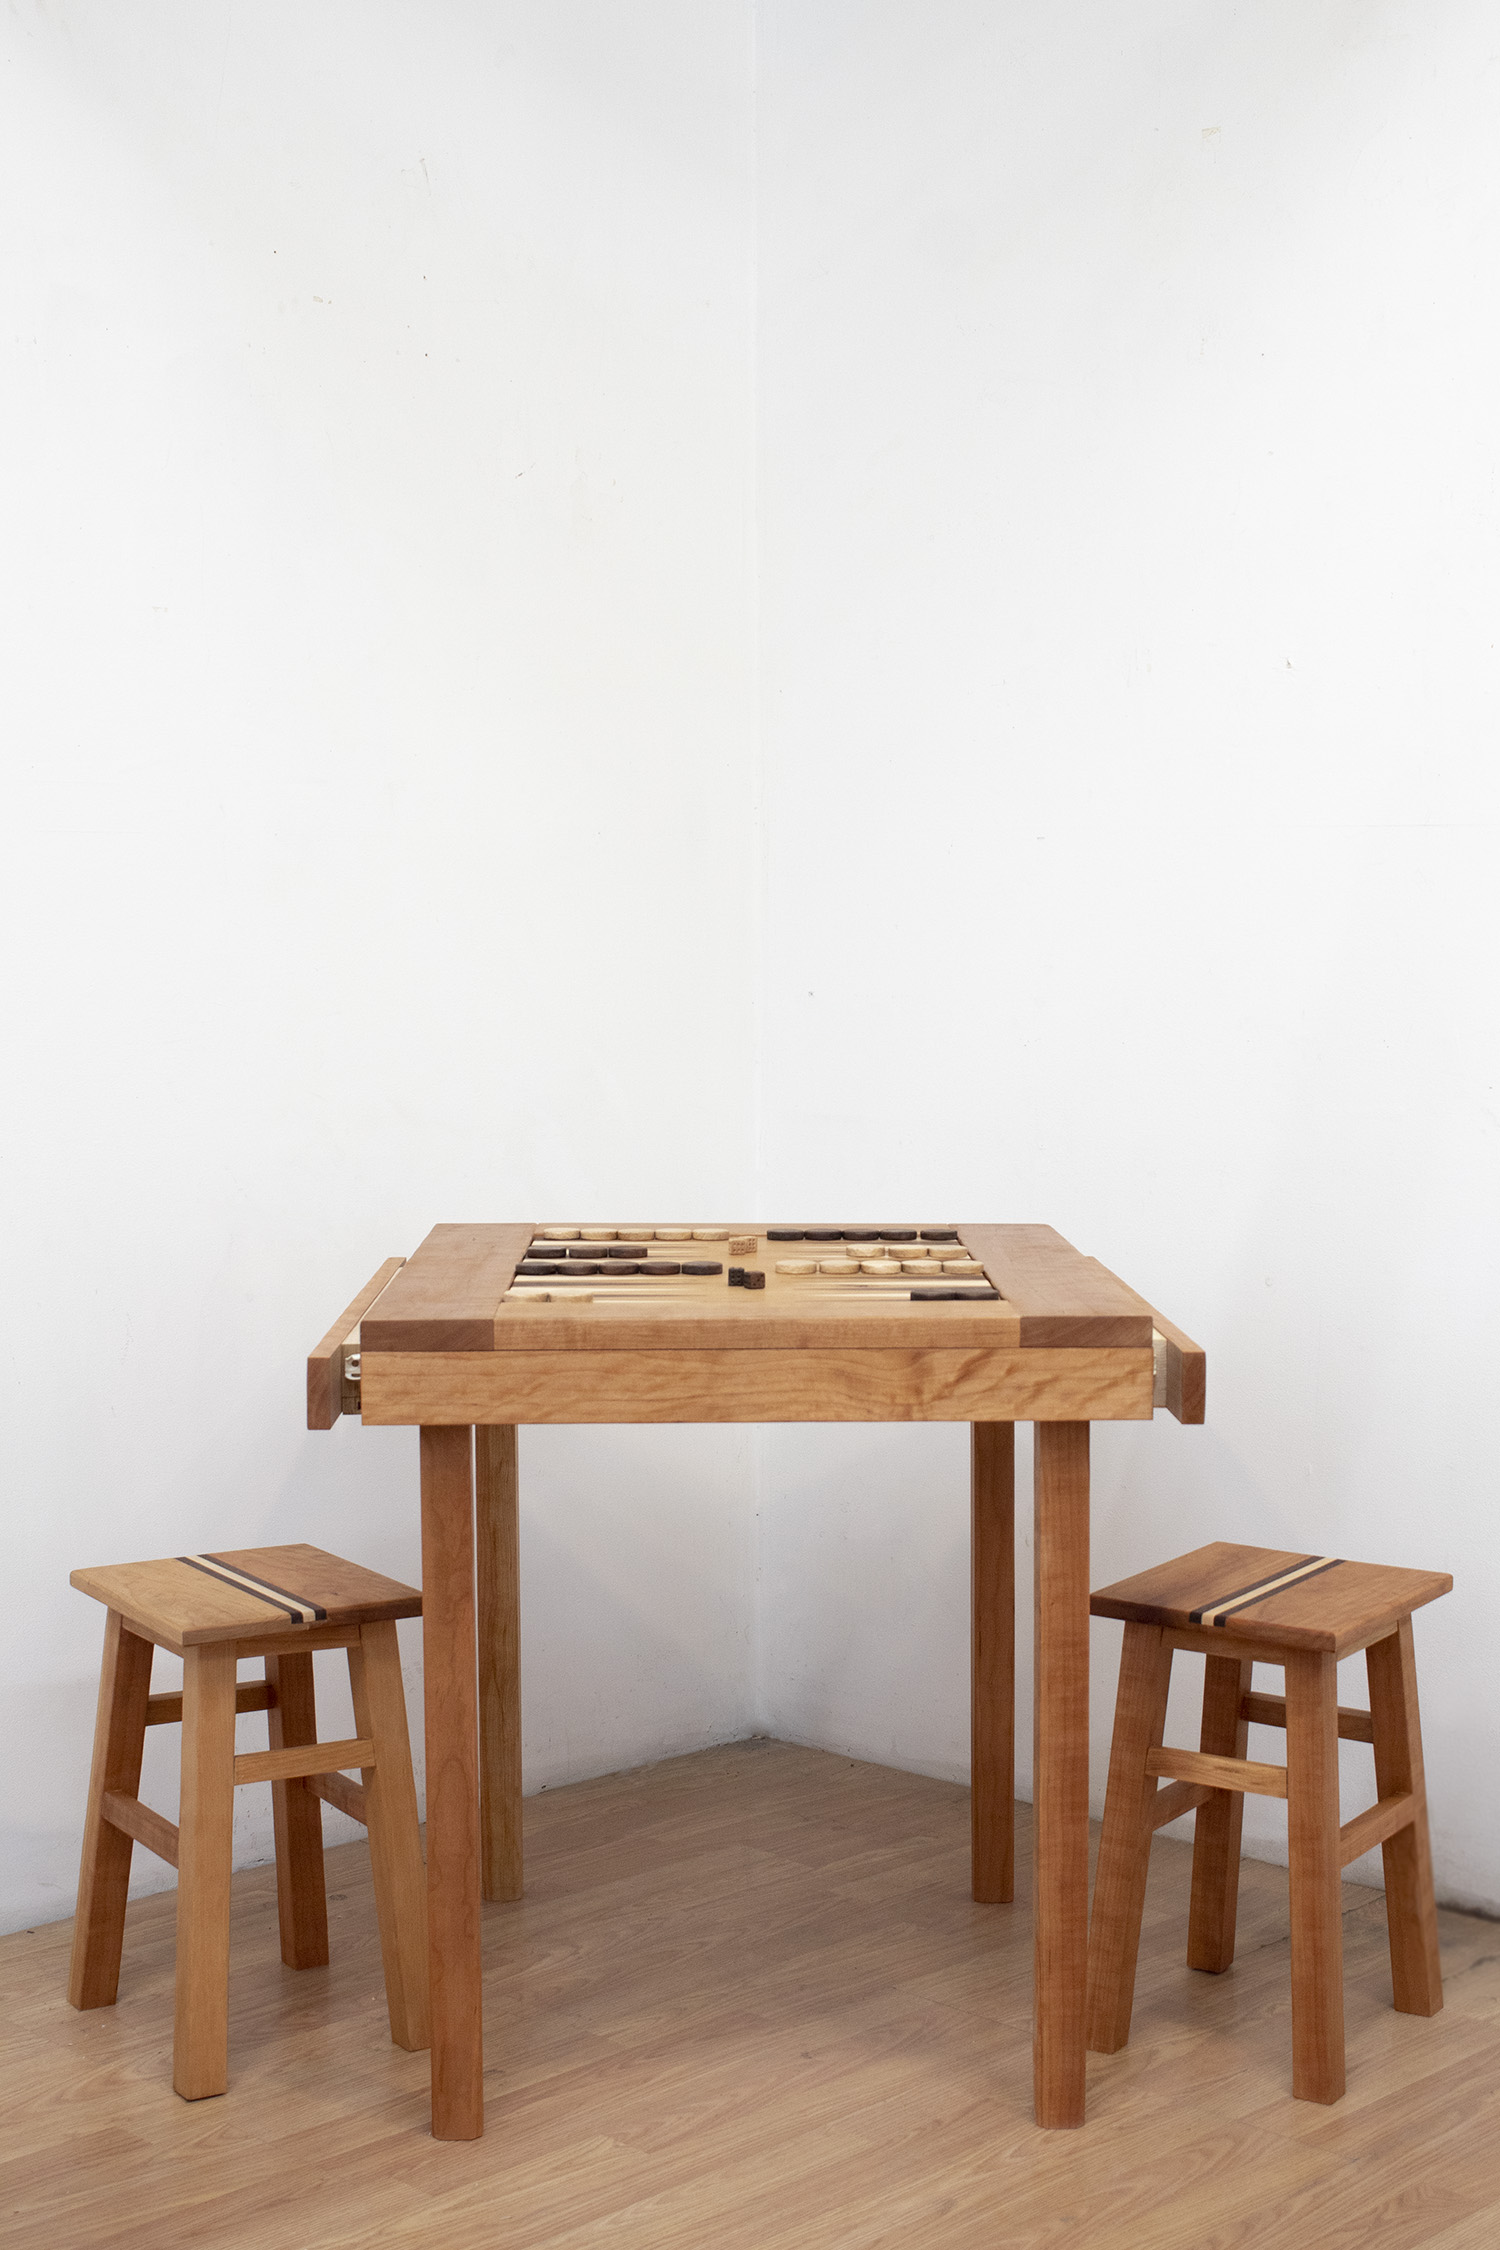 A simple table constructed with cherry wood. The center contains an inlaid backgammon board – constructed from cherry, maple, and walnut.